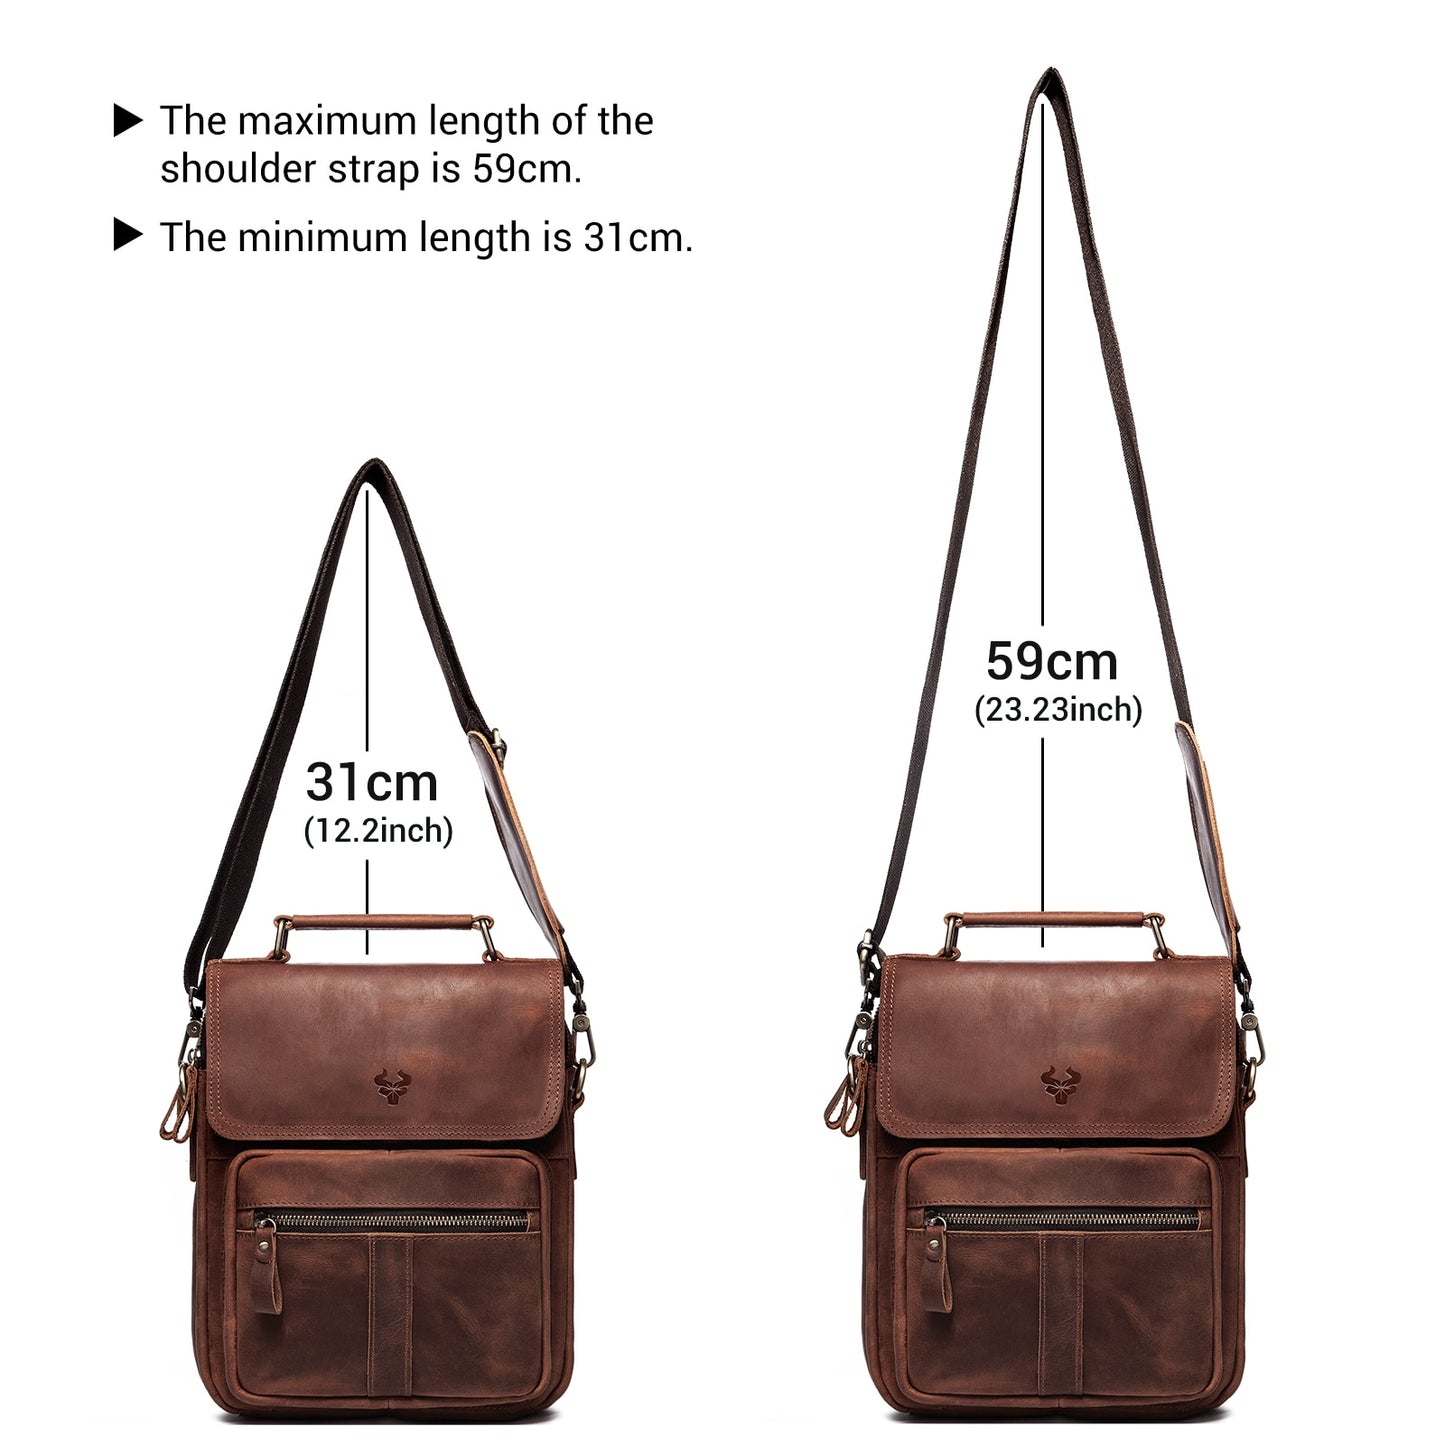 HUMERPAUL Genuine Leather Men's Shoulder Bag Luxury Work Business Messenger Bags Fashion Male Crossbody with Adjustable Straps